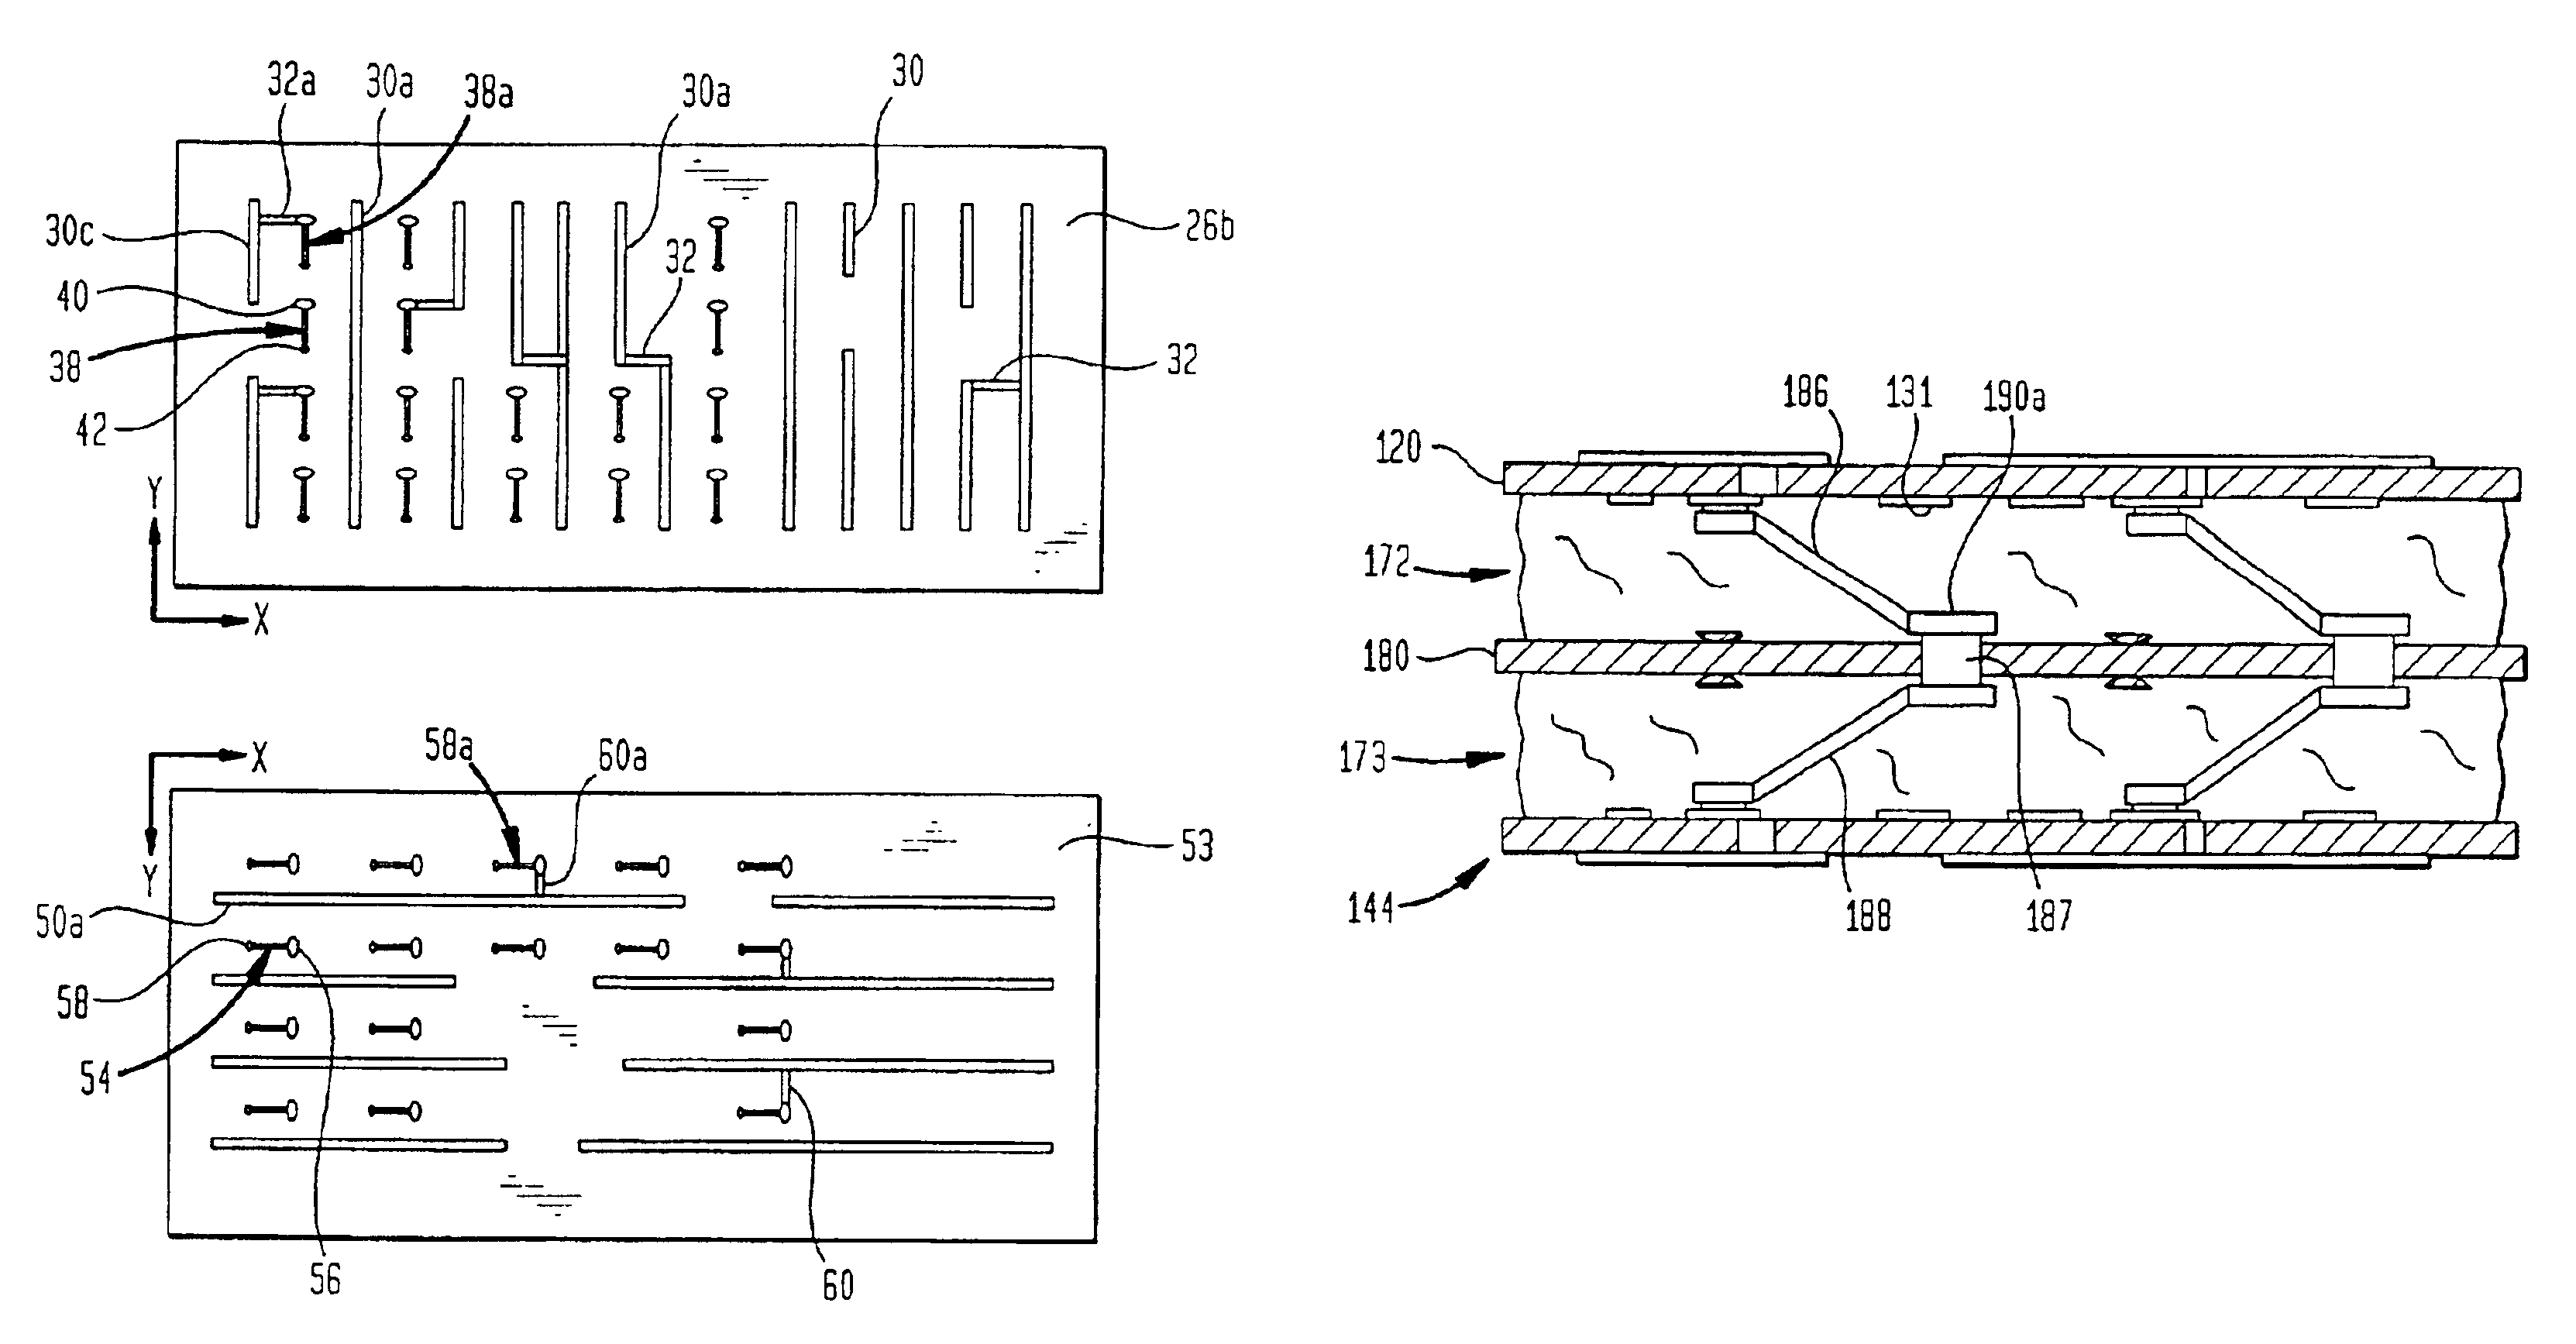 Multi-layer substrates and fabrication processes